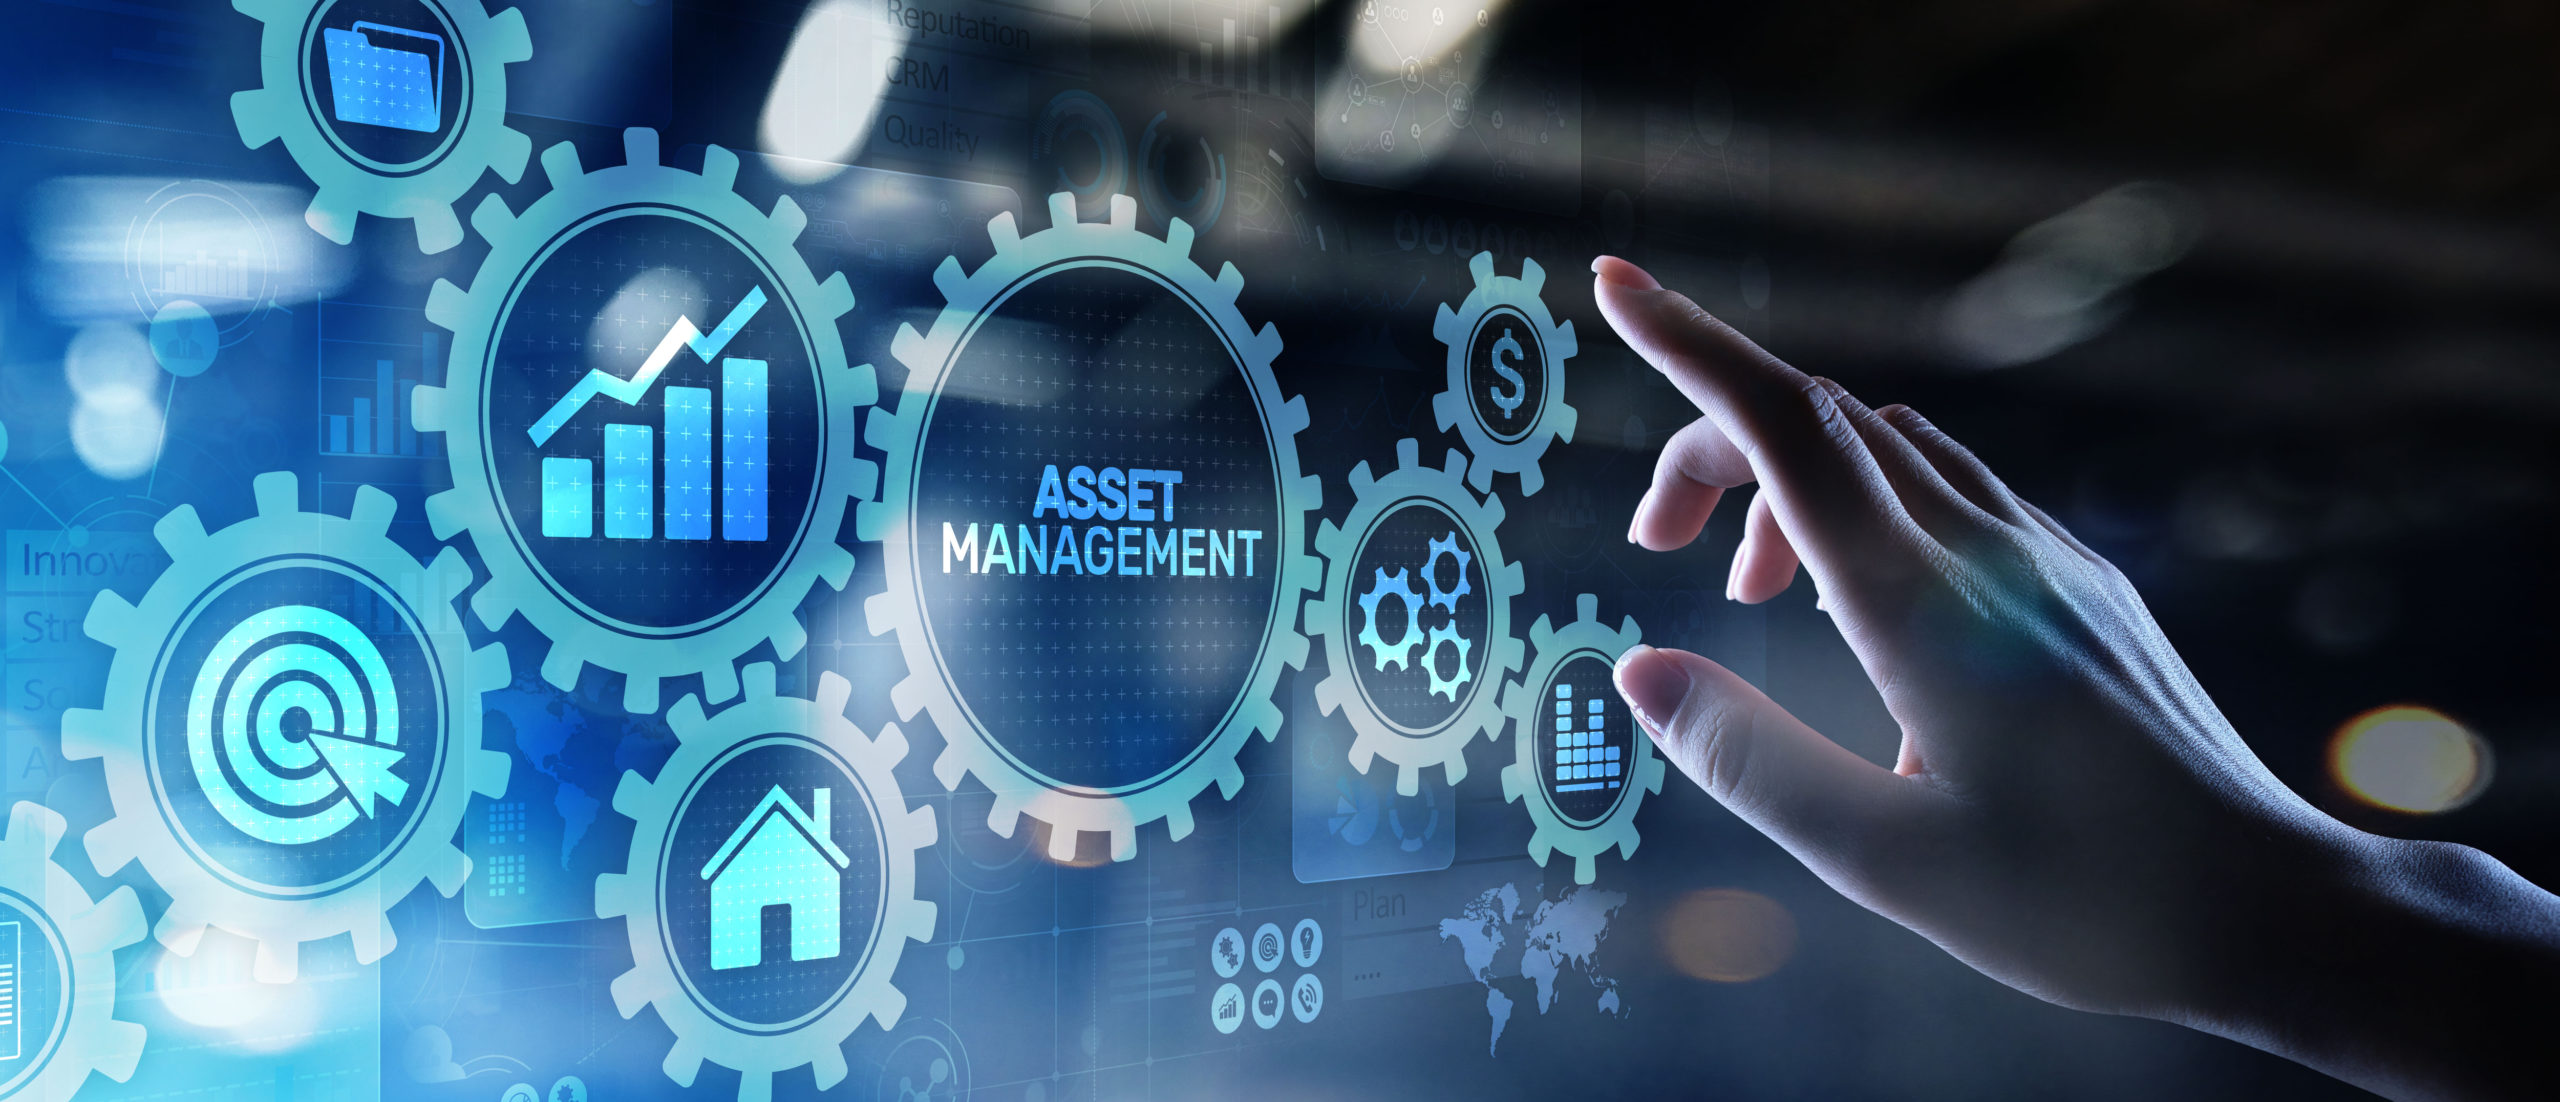 Asset Management St. Peters, MO | Financial Planners | Investment Advisors | Wealth Management